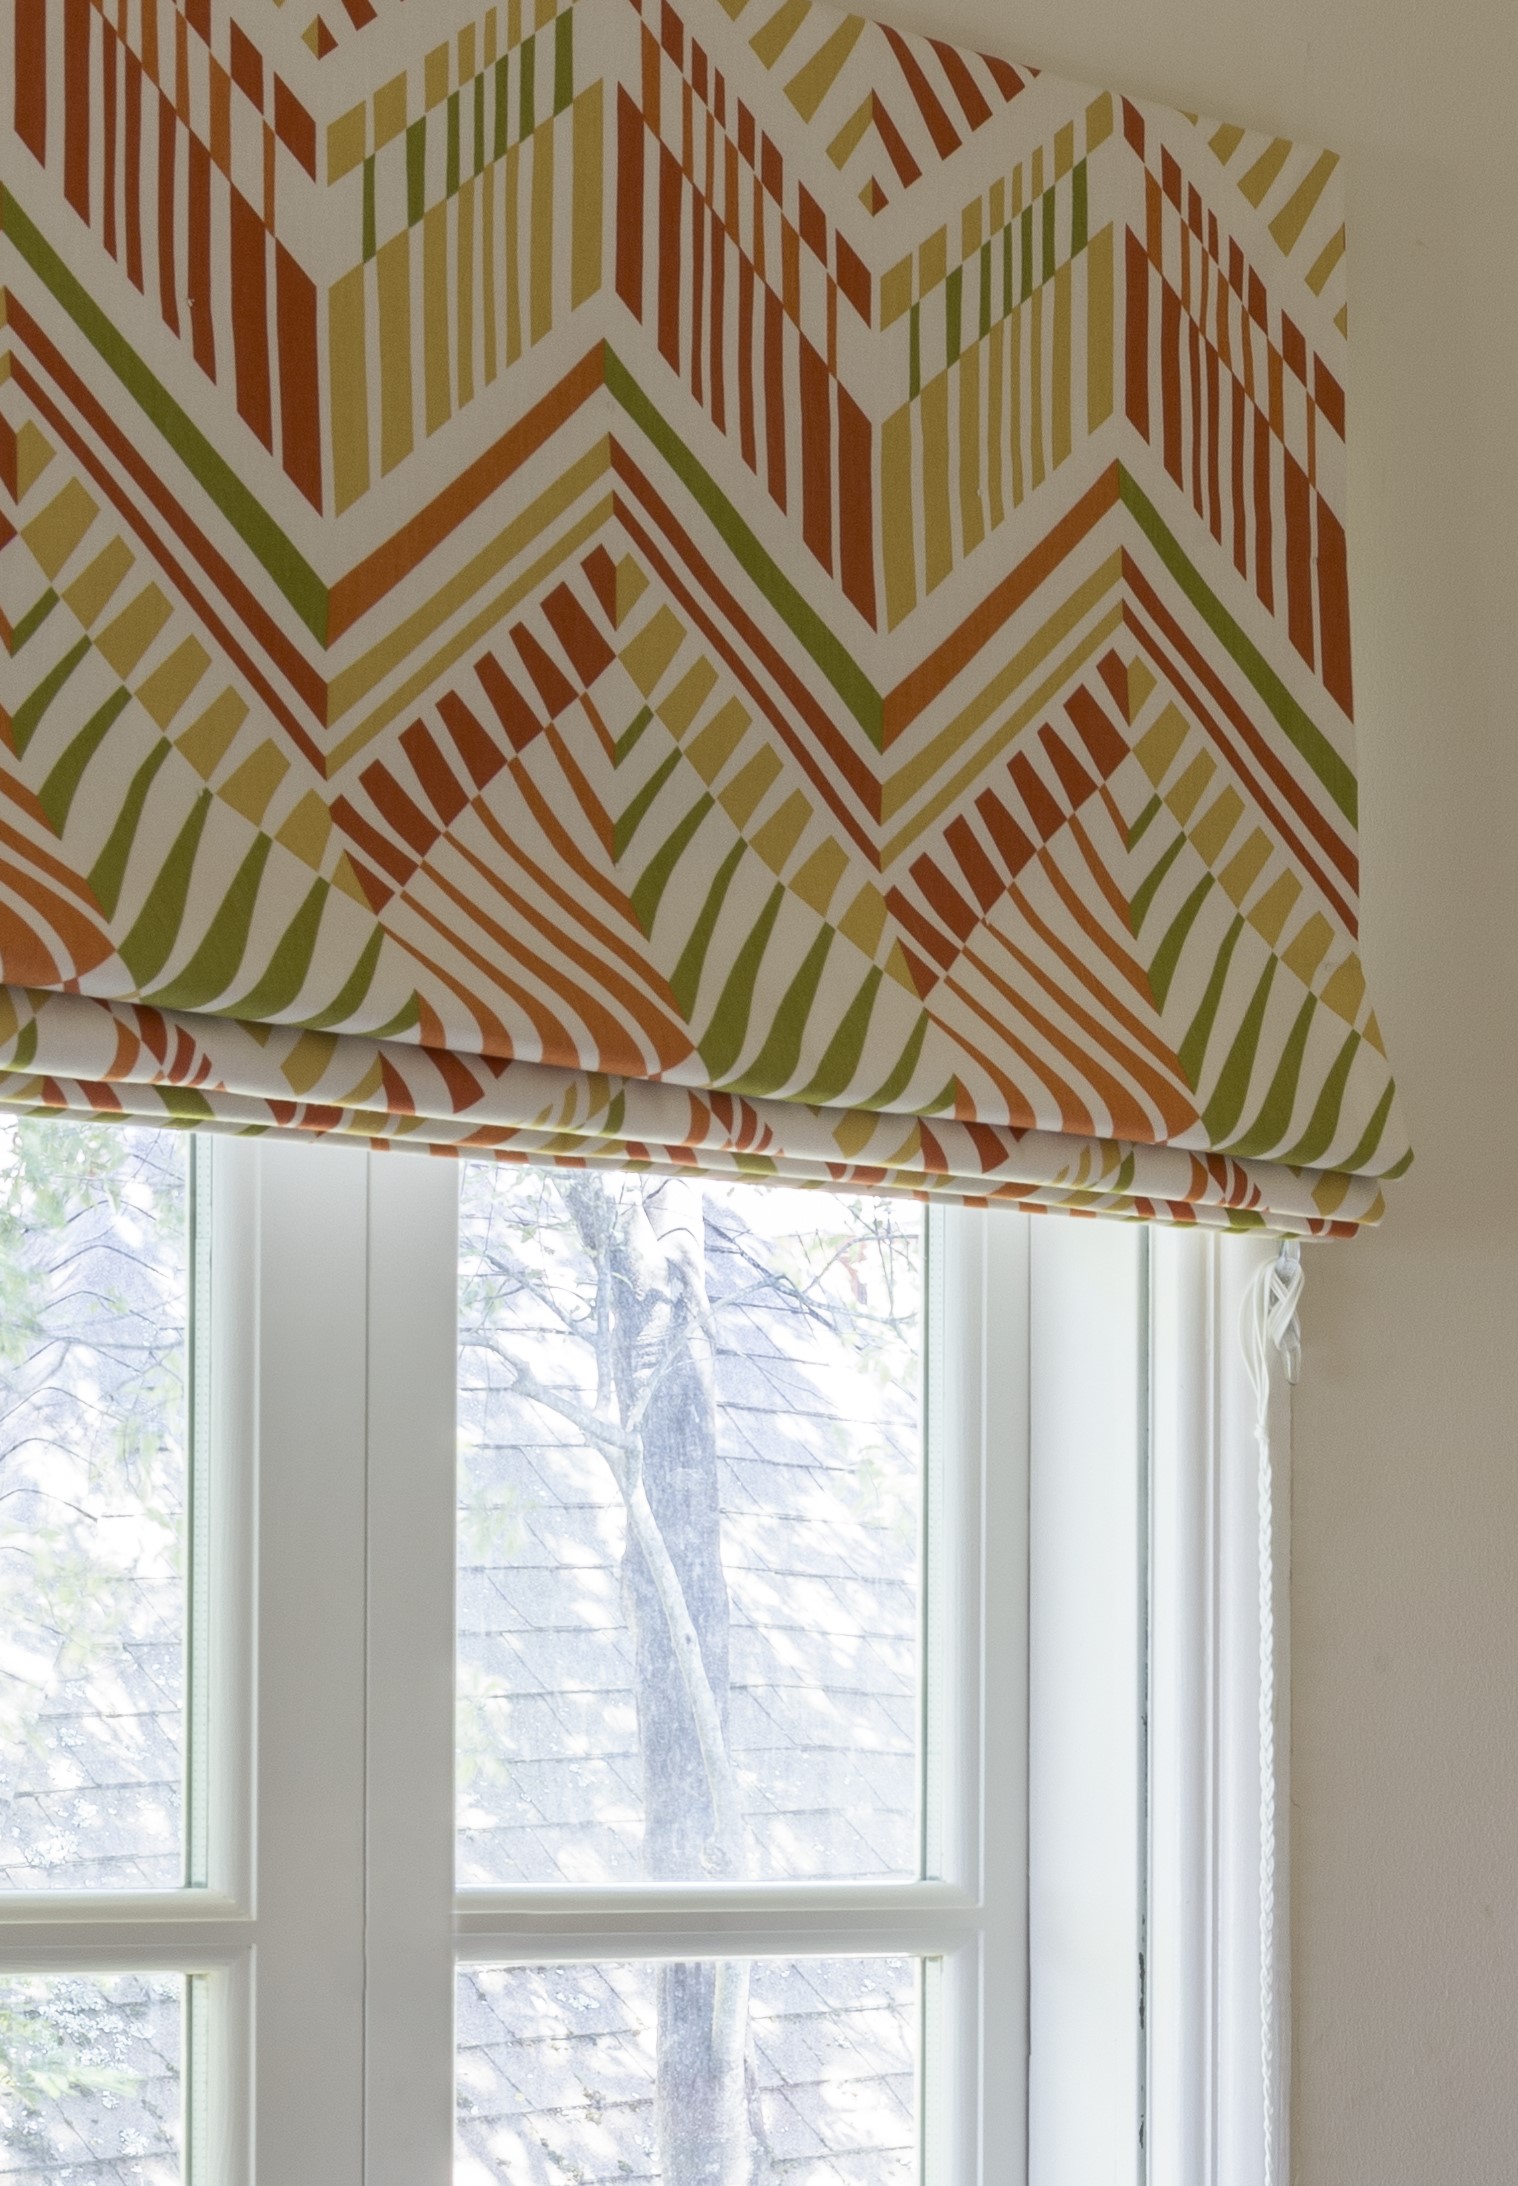 Roman shade with vibrant pink and green color scheme and lined pattern